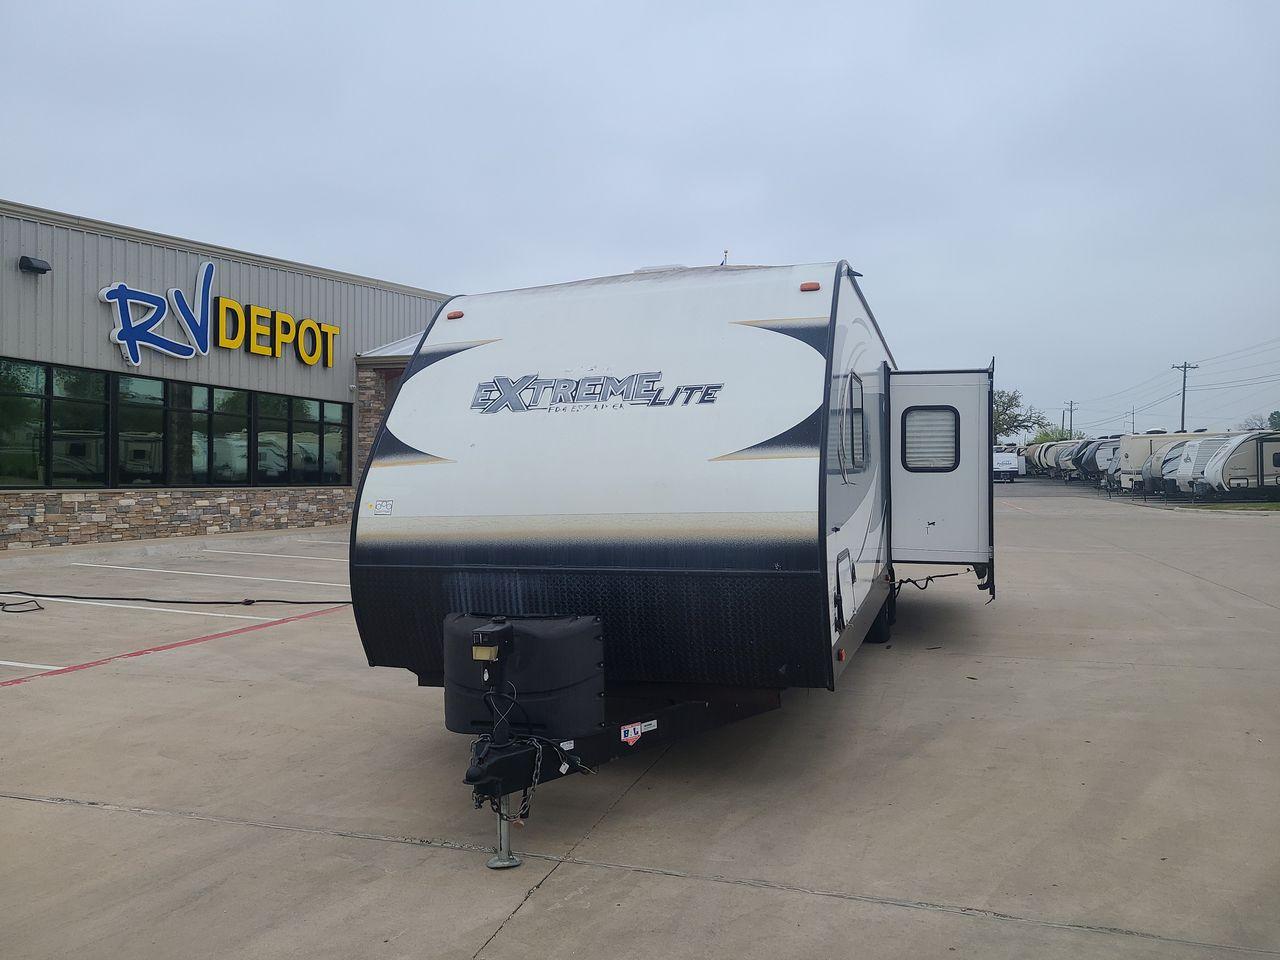 2017 WHITE FOREST RIVER VIBE 277RLS (4X4TVBD28H4) , Length: 34.58 ft. | Dry Weight: 5,945 lbs. | Slides: 1 transmission, located at 4319 N Main Street, Cleburne, TX, 76033, (817) 221-0660, 32.435829, -97.384178 - Enjoy taking trips in this Vibe Extreme Lite travel trailer style with your loved ones. One wide slide, two entry/exit doors, a rear living plan, and much more are included in the Model 277RLS! The dimensions of this unit are 34.58 ft in length, 8 ft in width, and 11 ft in height. It has a dry we - Photo #0